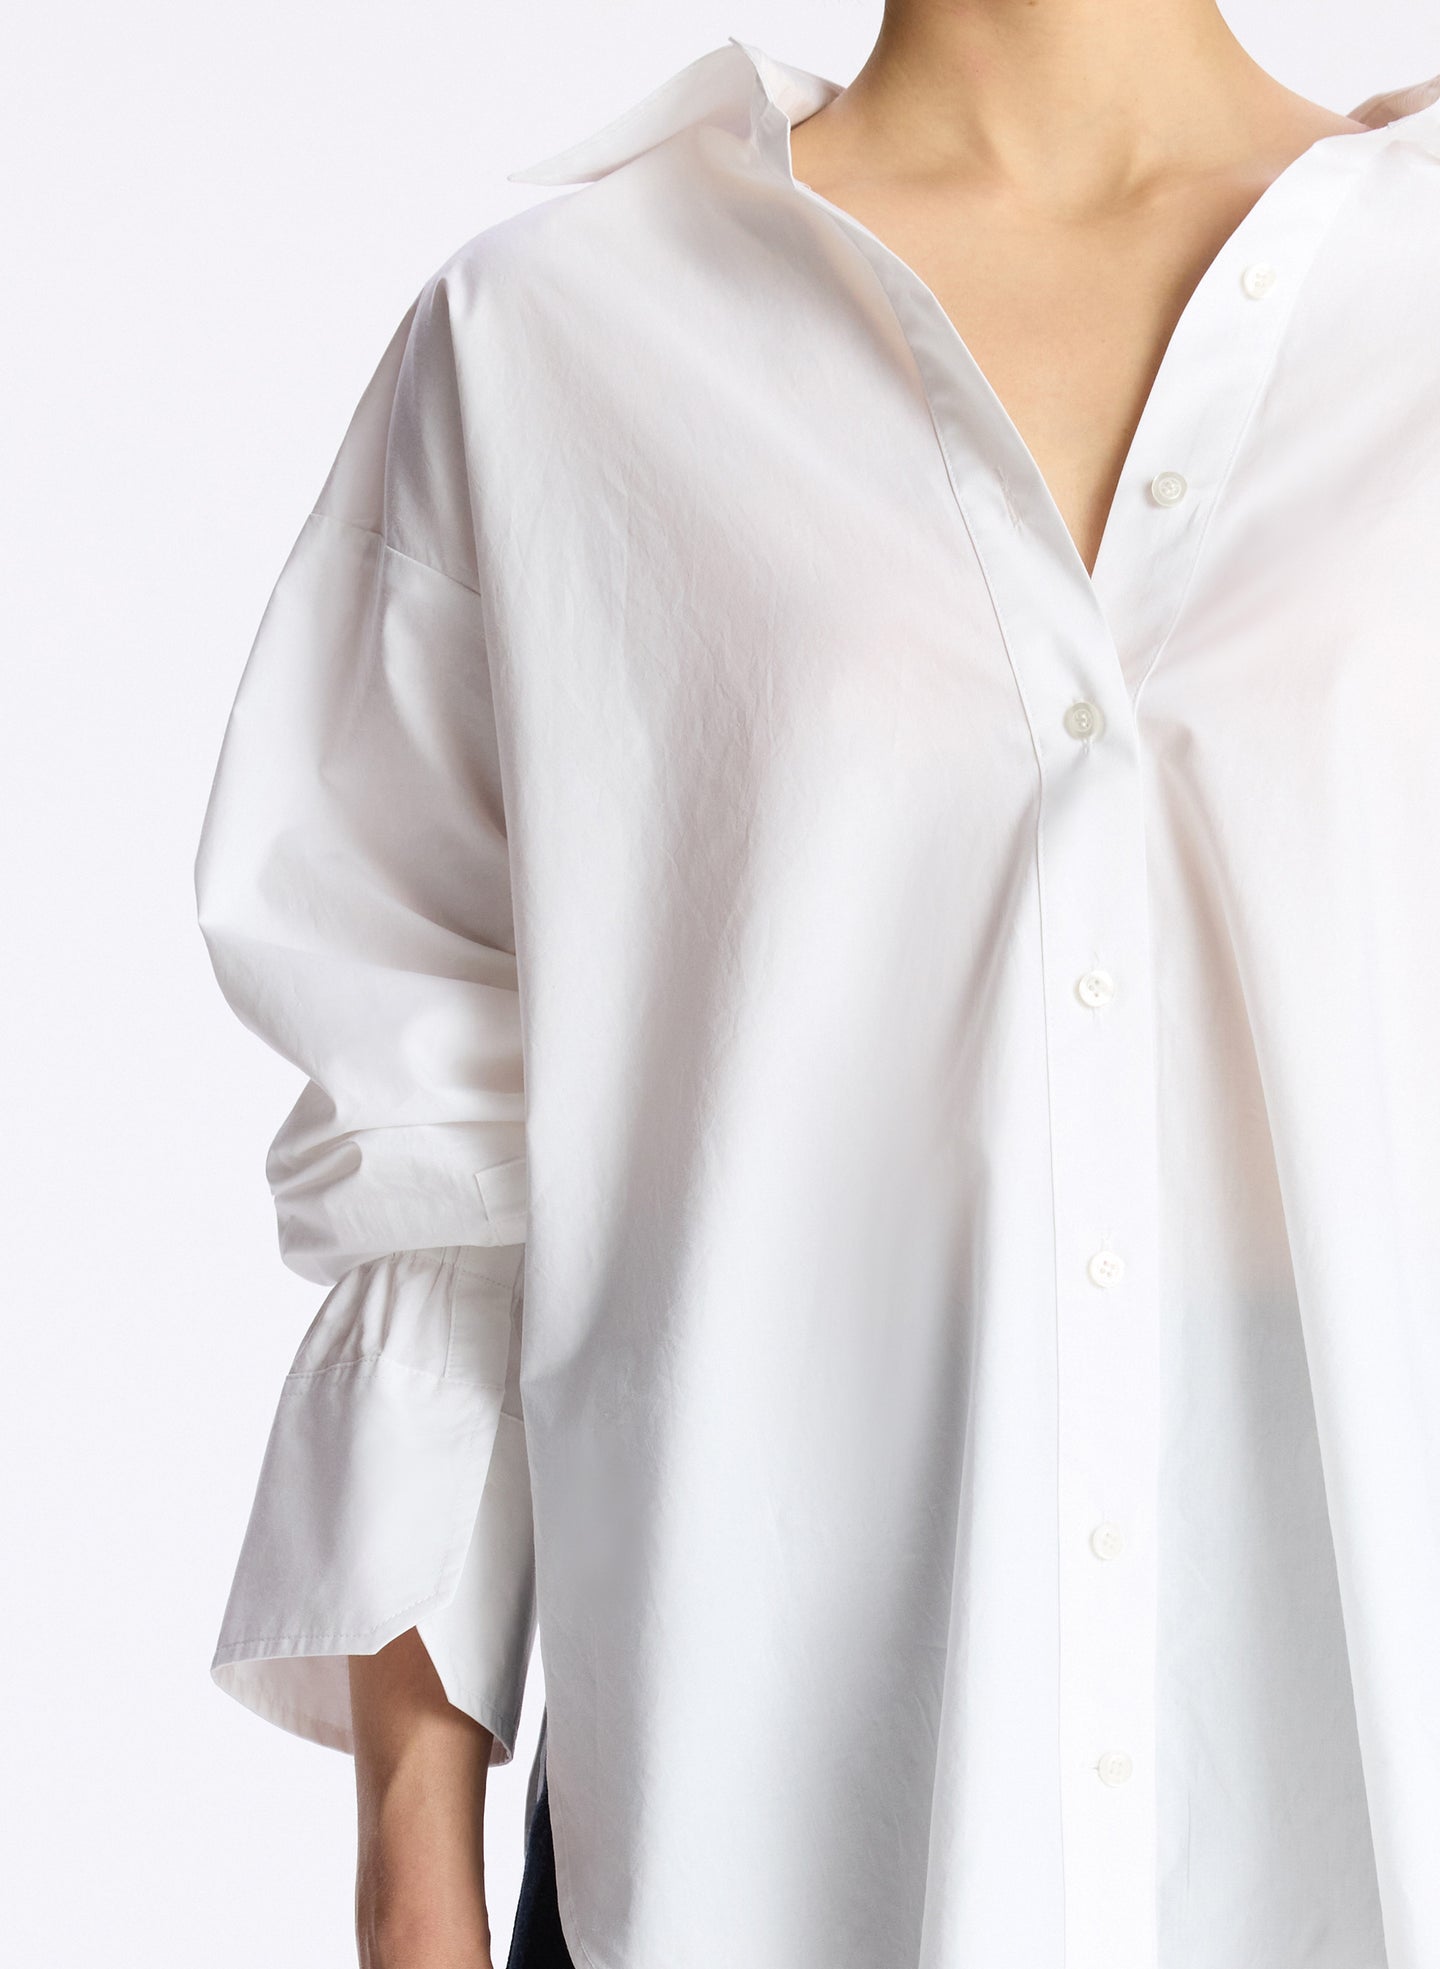 detail view of woman wearing white oversized button down shirt and dark wash denim jeans